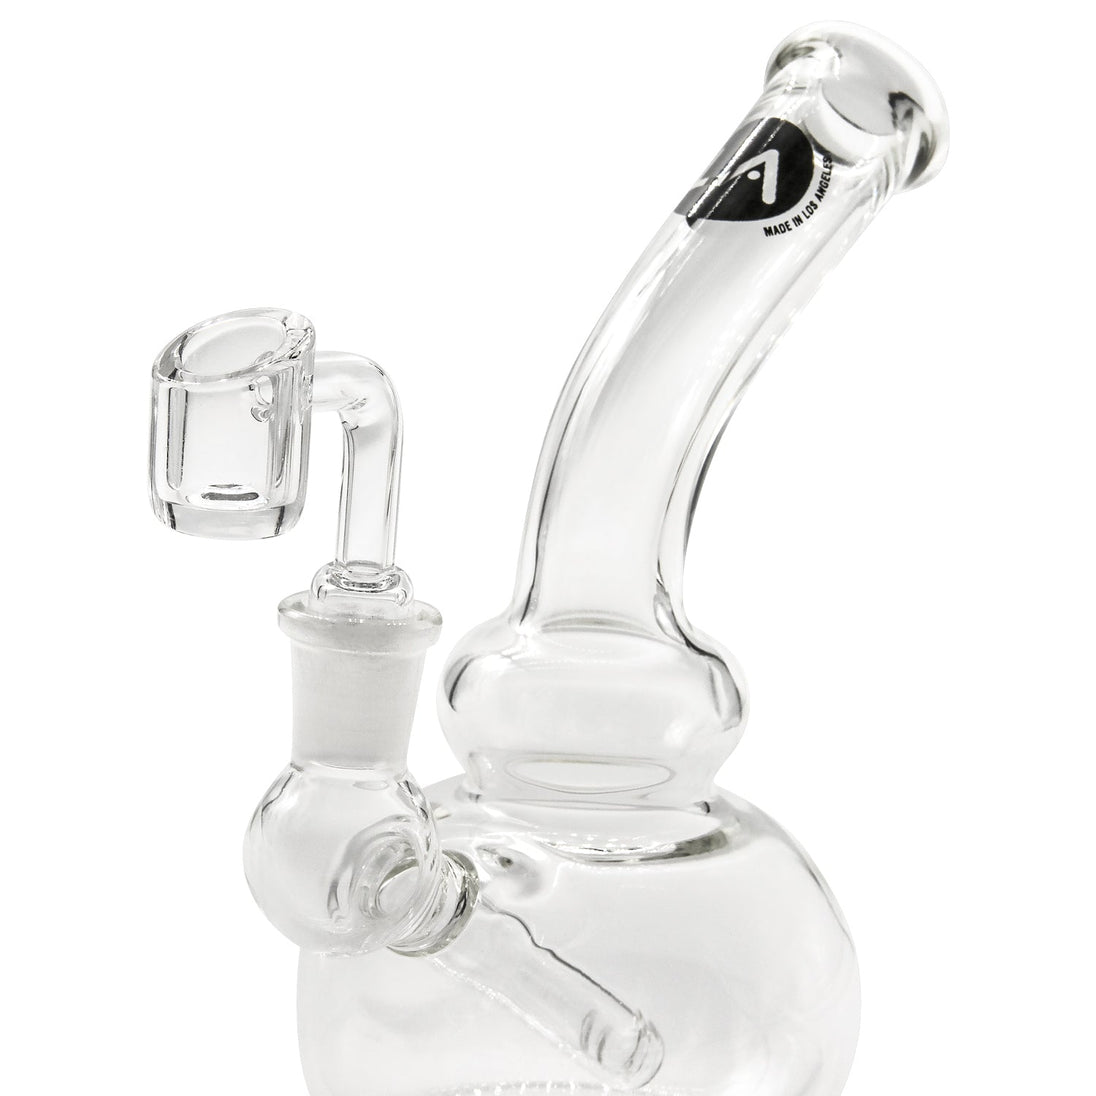 LA Pipes Bubble Concentrate Waterpipe - Glasss Station